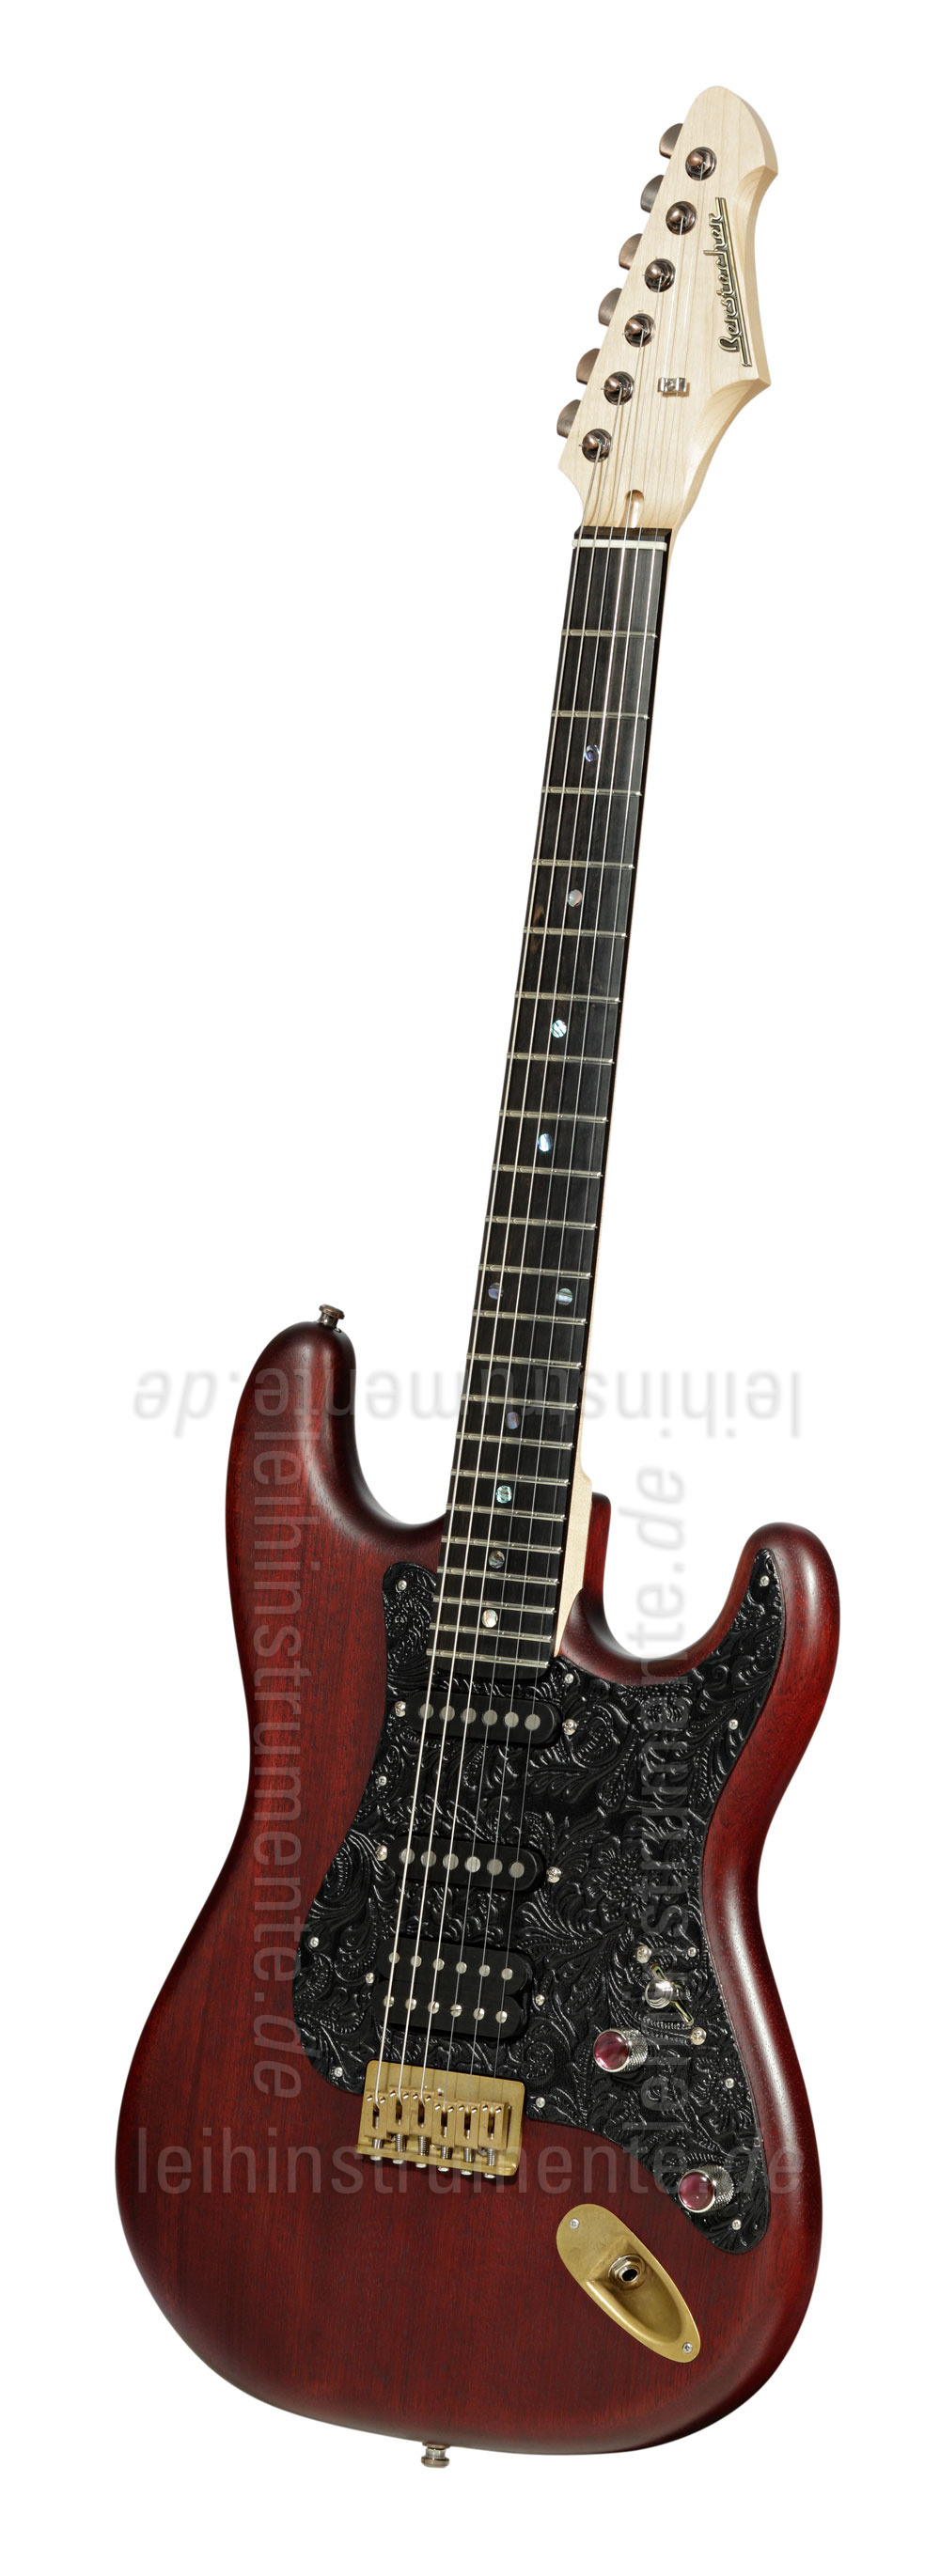 to article description / price Electric Guitar BERSTECHER Deluxe Vintage (Hot B) - Black Cherry / Floral Black + hard case - made in Germany